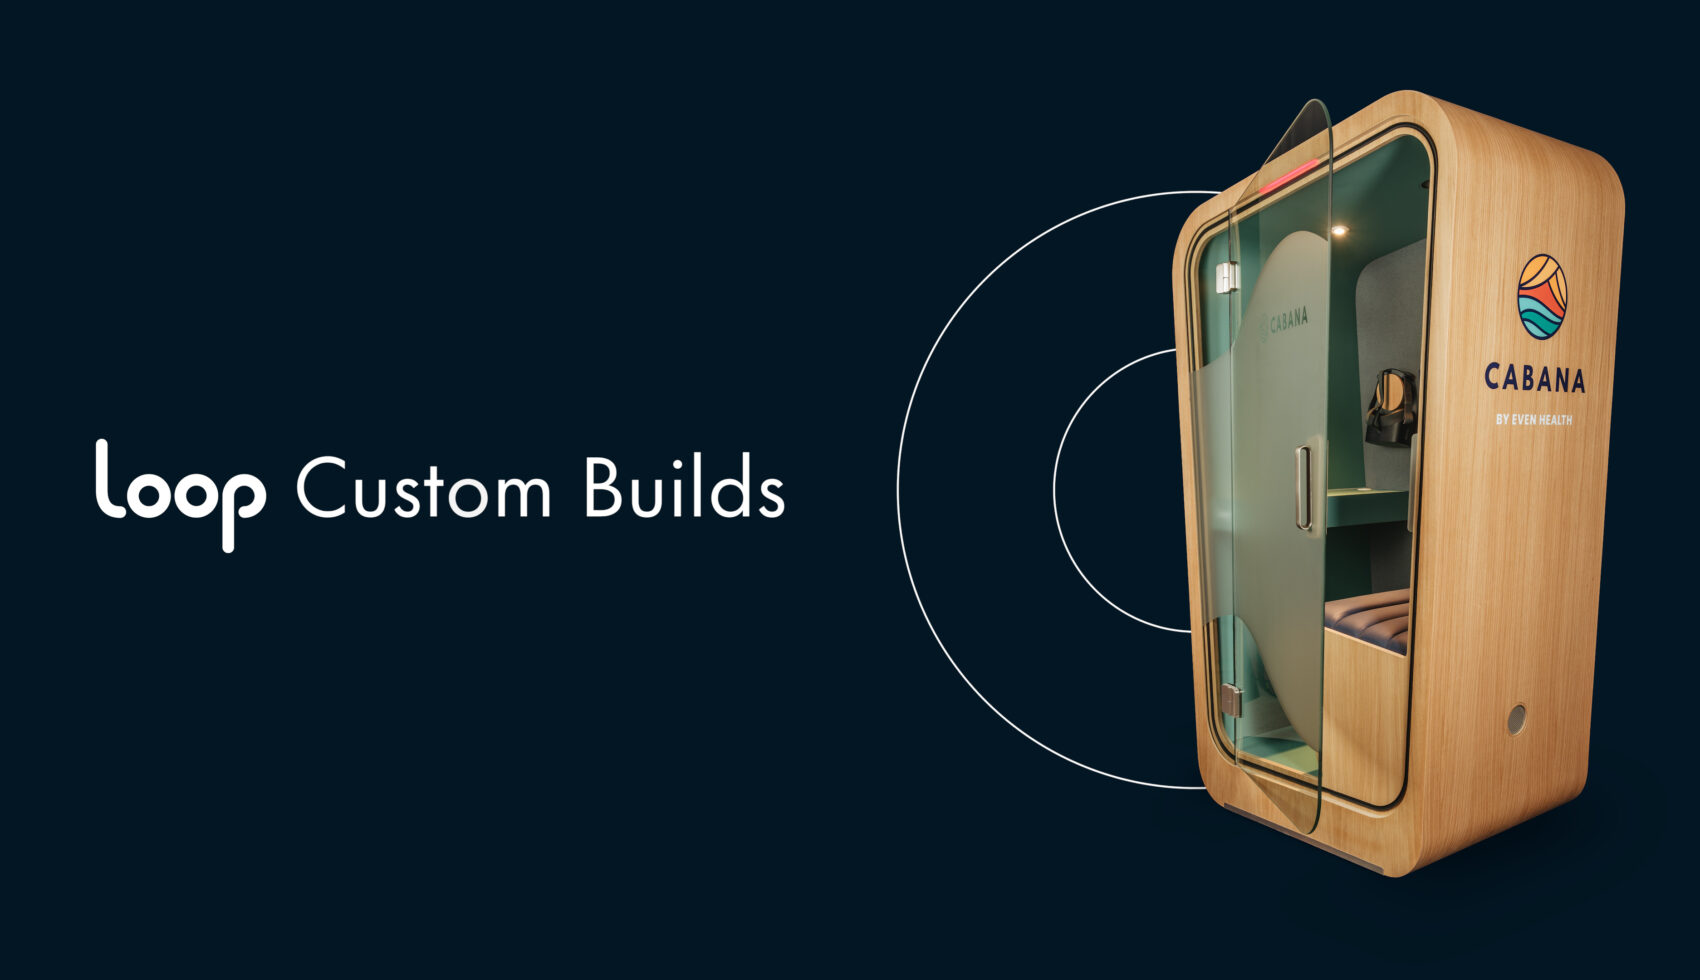 Loop Custom builds showing a Solo Booth